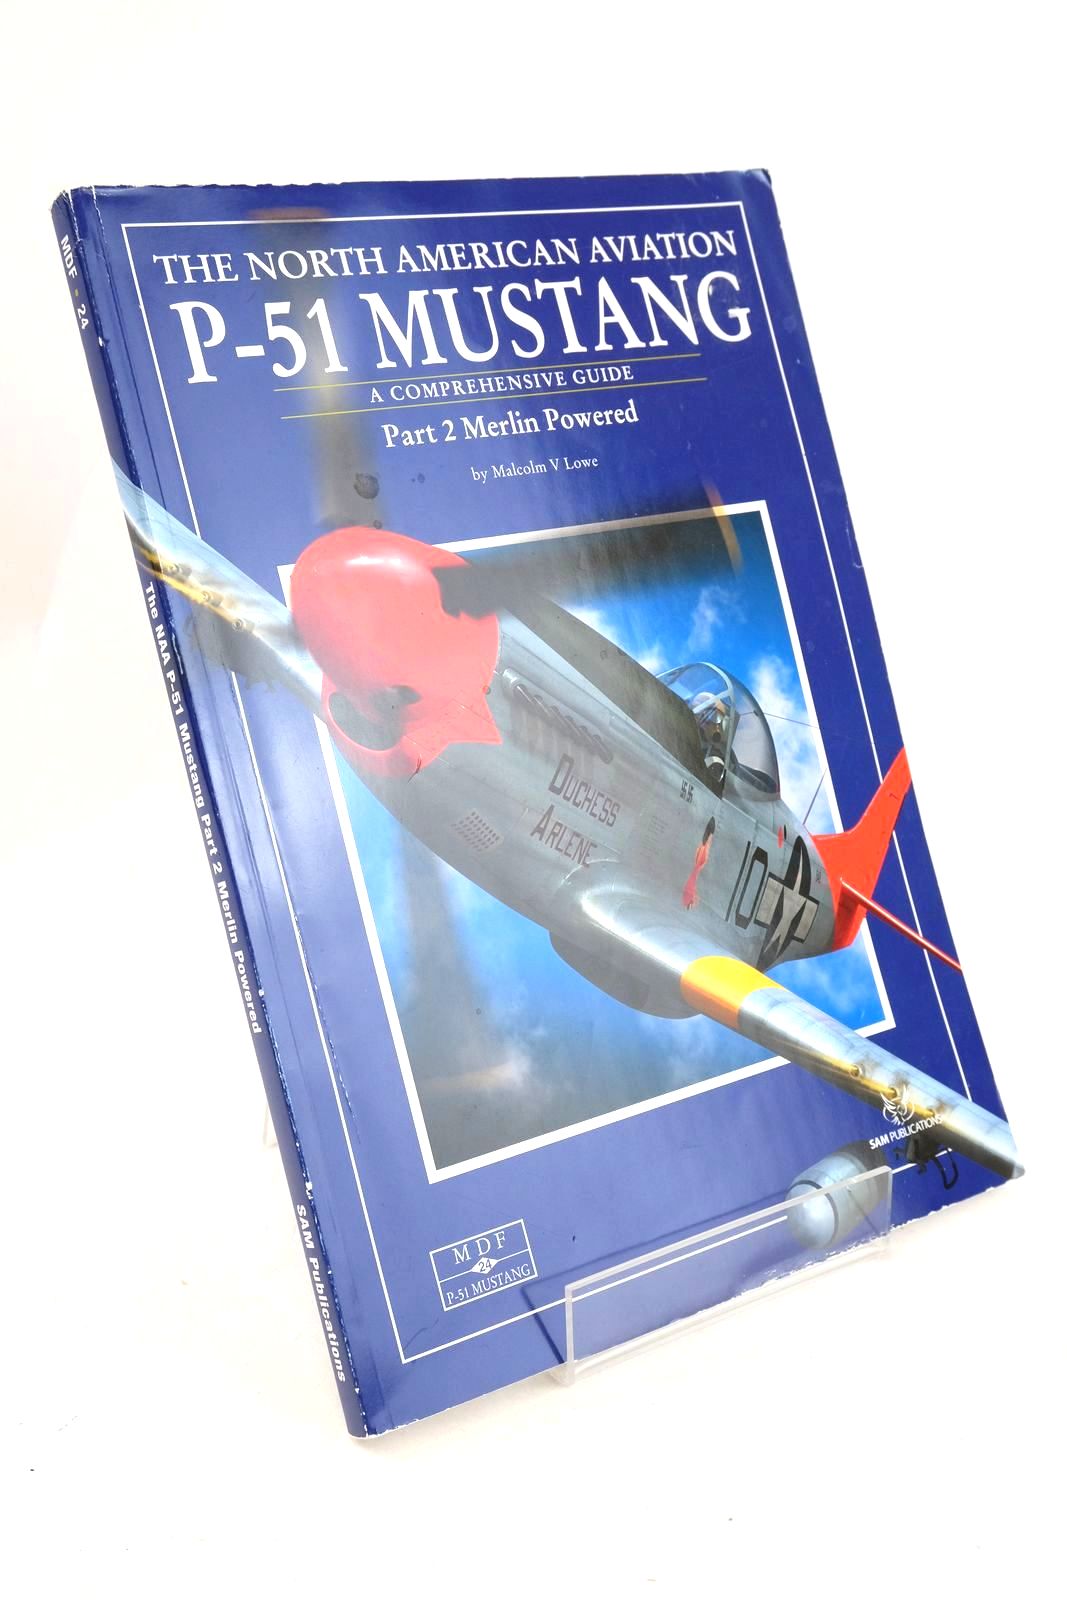 Photo of THE NORTH AMERICAN AVIATION P-51 MUSTANG A COMPREHENSIVE GUIDE: PART 2 MERLIN POWERED written by Lowe, Malcolm V. published by SAM Publications (STOCK CODE: 1327210)  for sale by Stella & Rose's Books